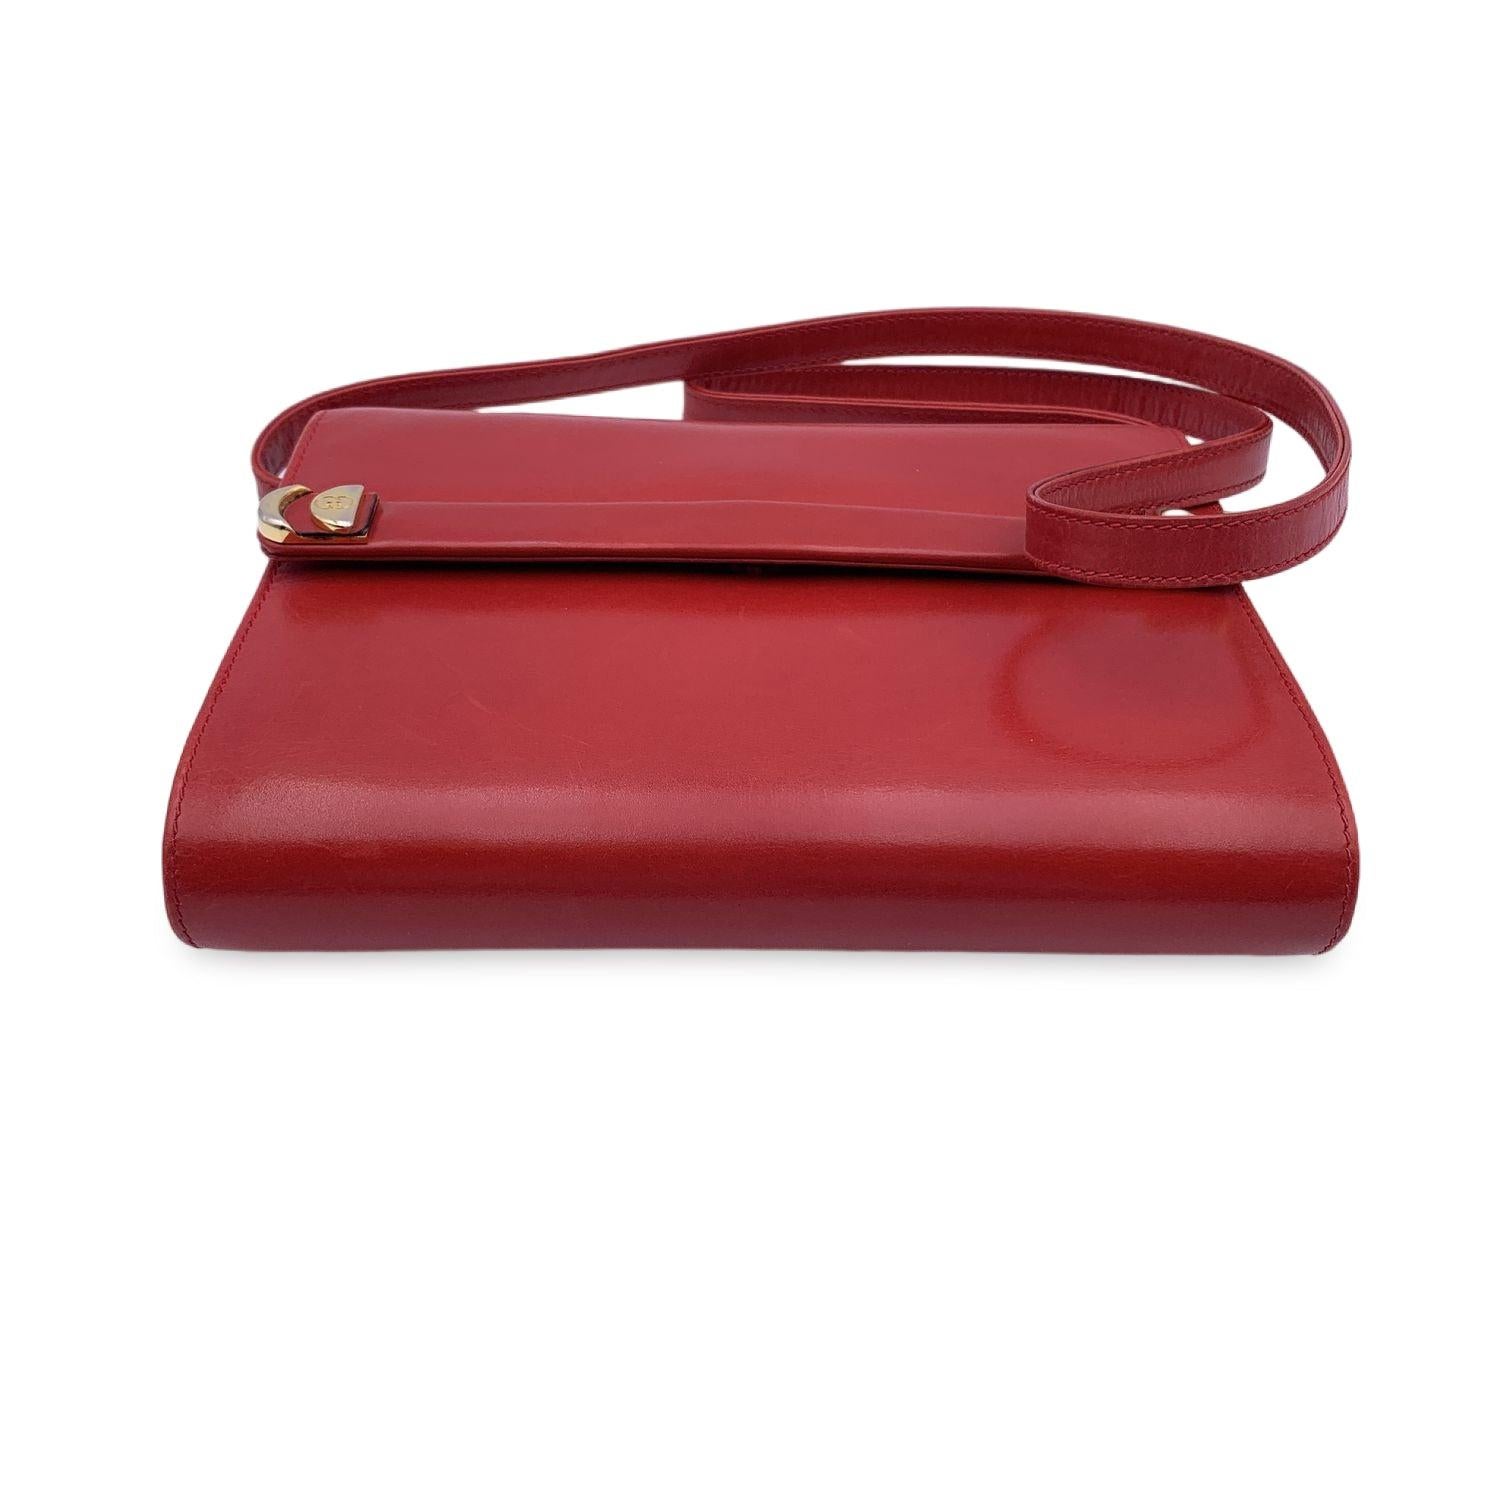 Gucci Vintage Red Leather Convertible Shoulder Bag Clutch In Good Condition For Sale In Rome, Rome